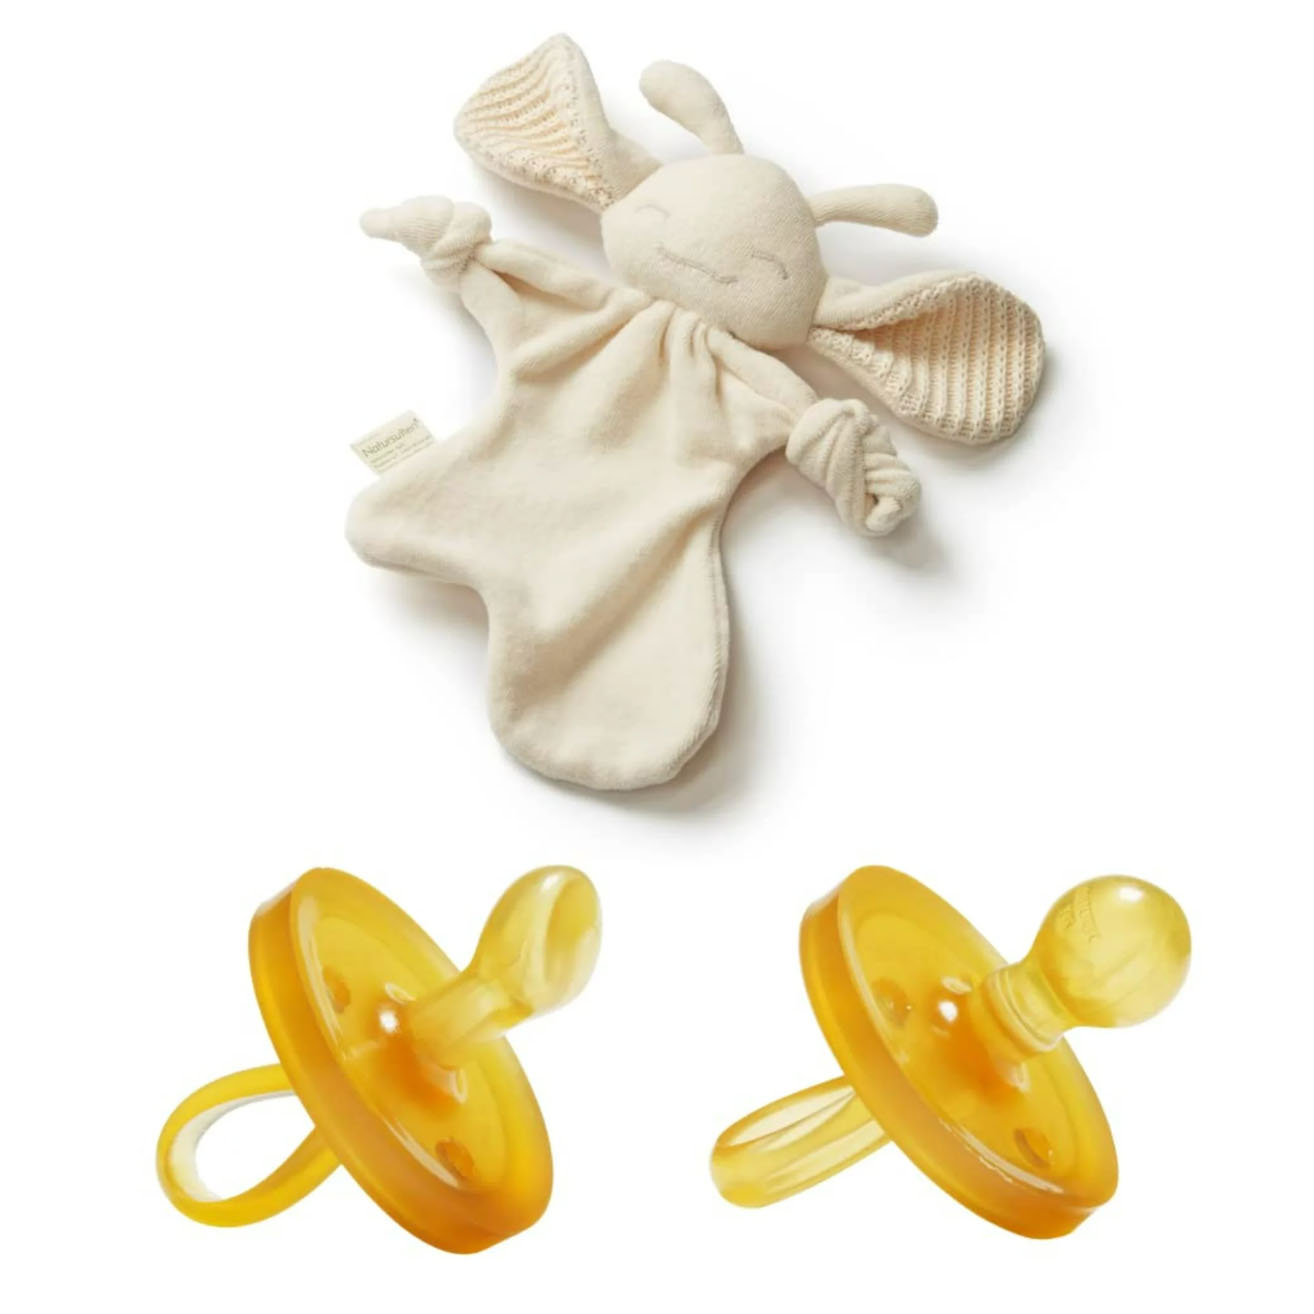 2 yellow pacifiers and a comforter